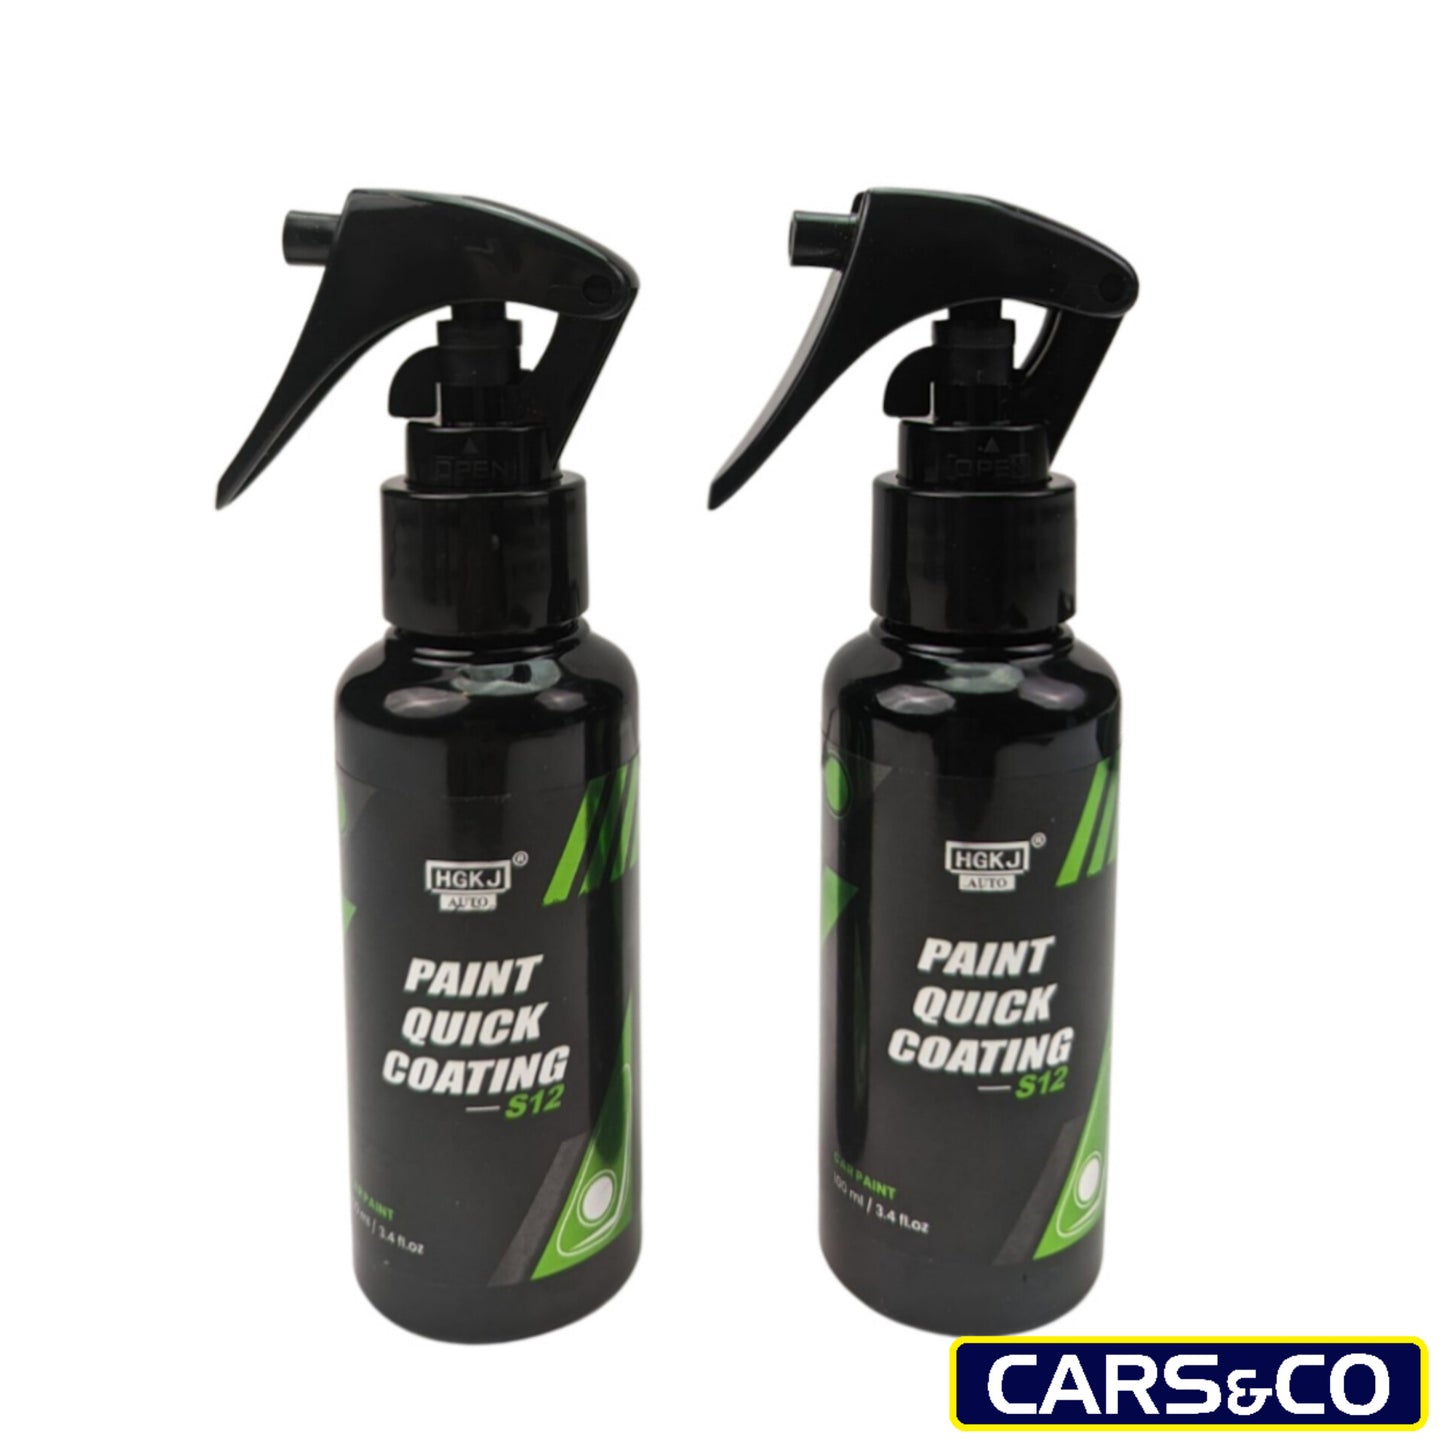 Car Paint Fast Coating Agent On Light And Water